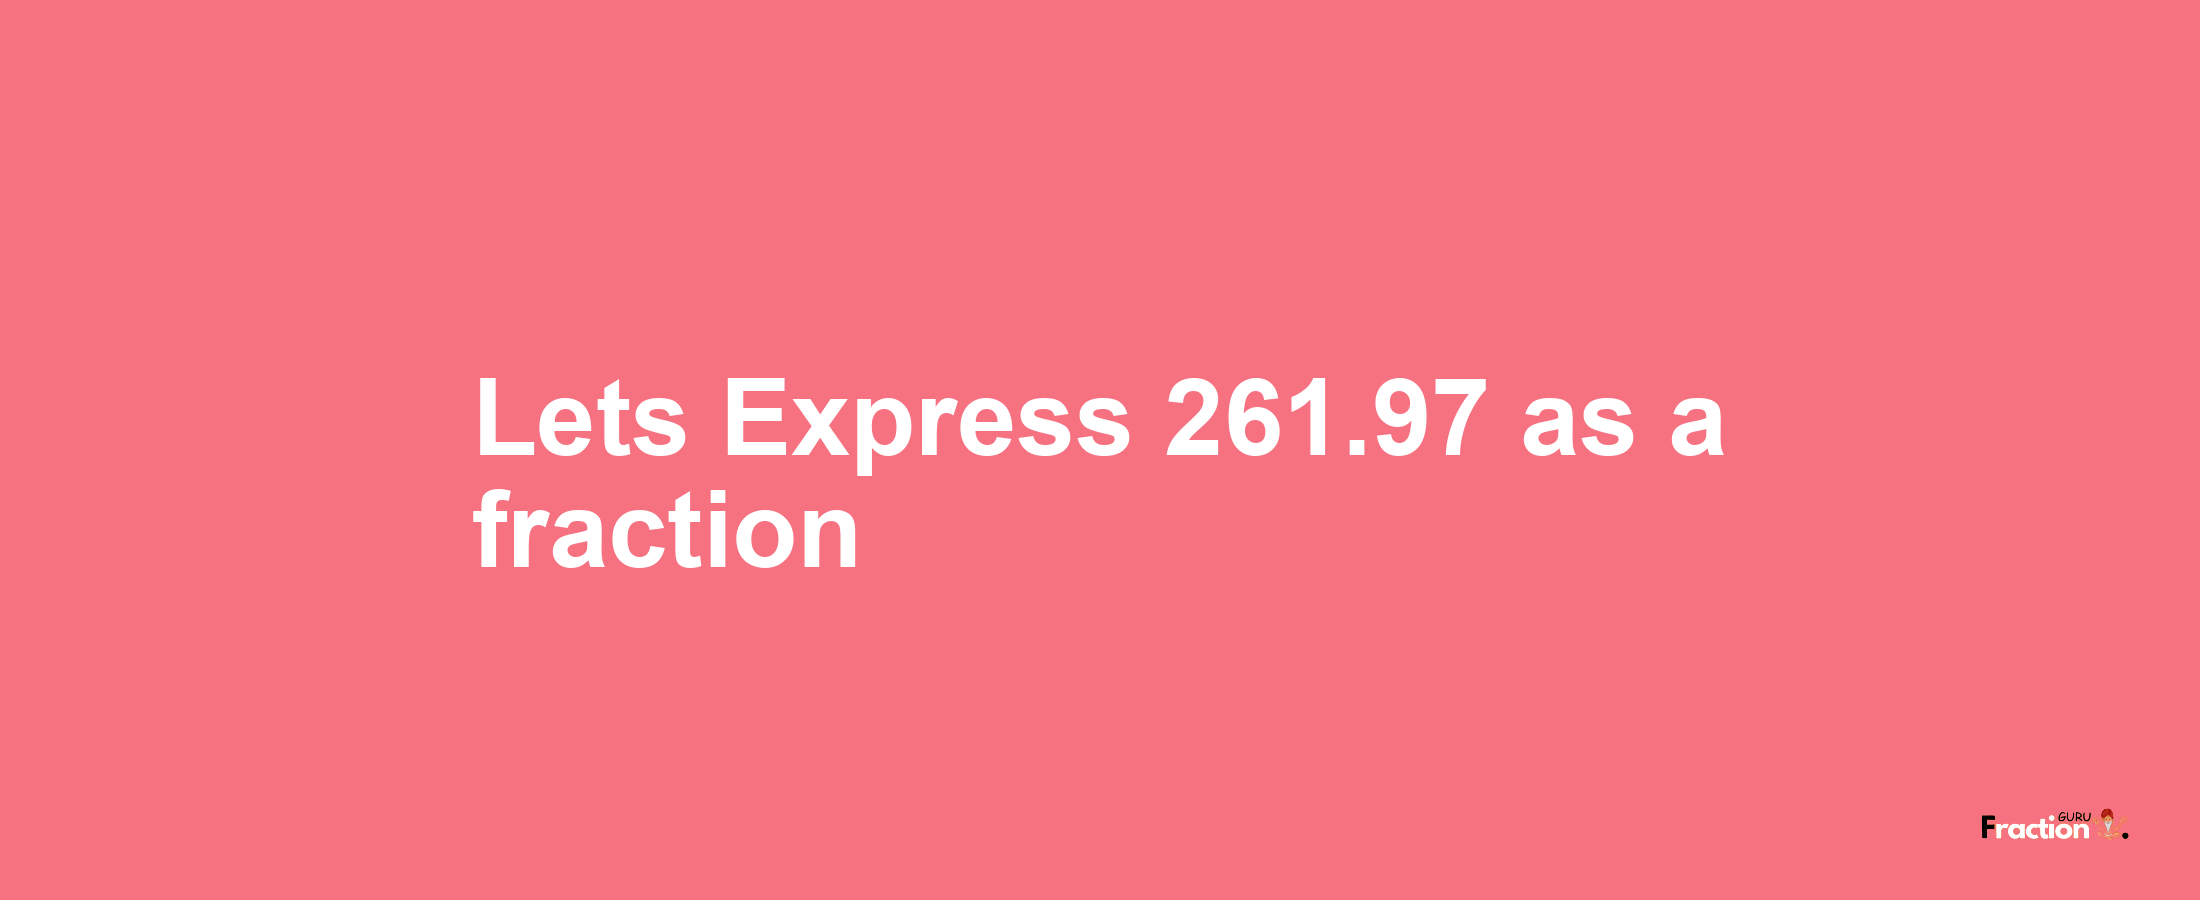 Lets Express 261.97 as afraction